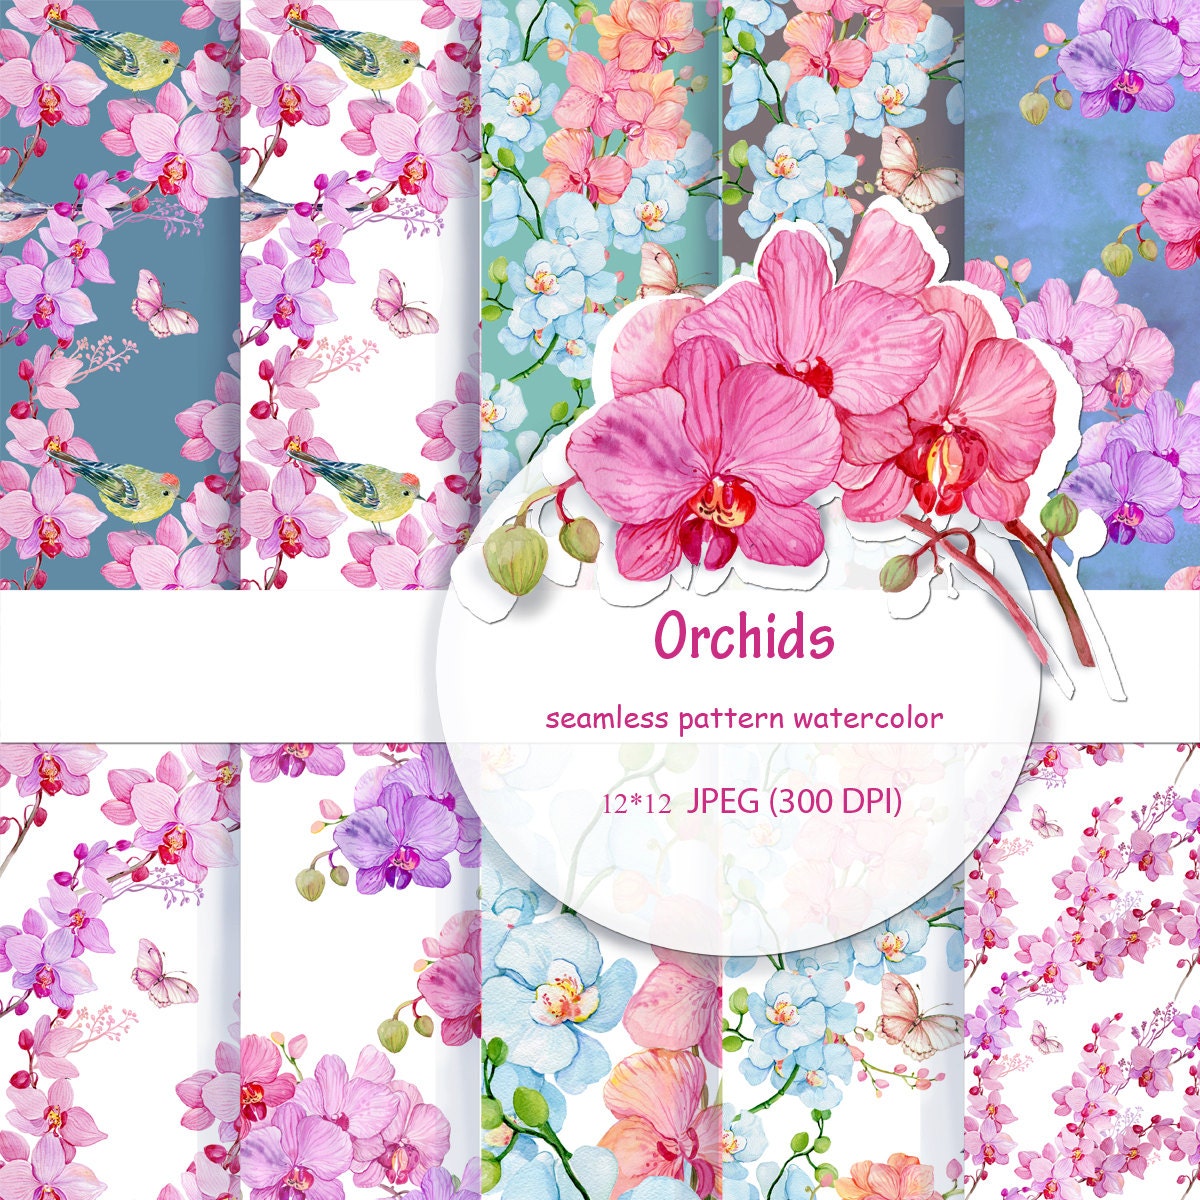 Download seamless pattern watercolor.Orchid flowers 12 x 12 JPEG 300